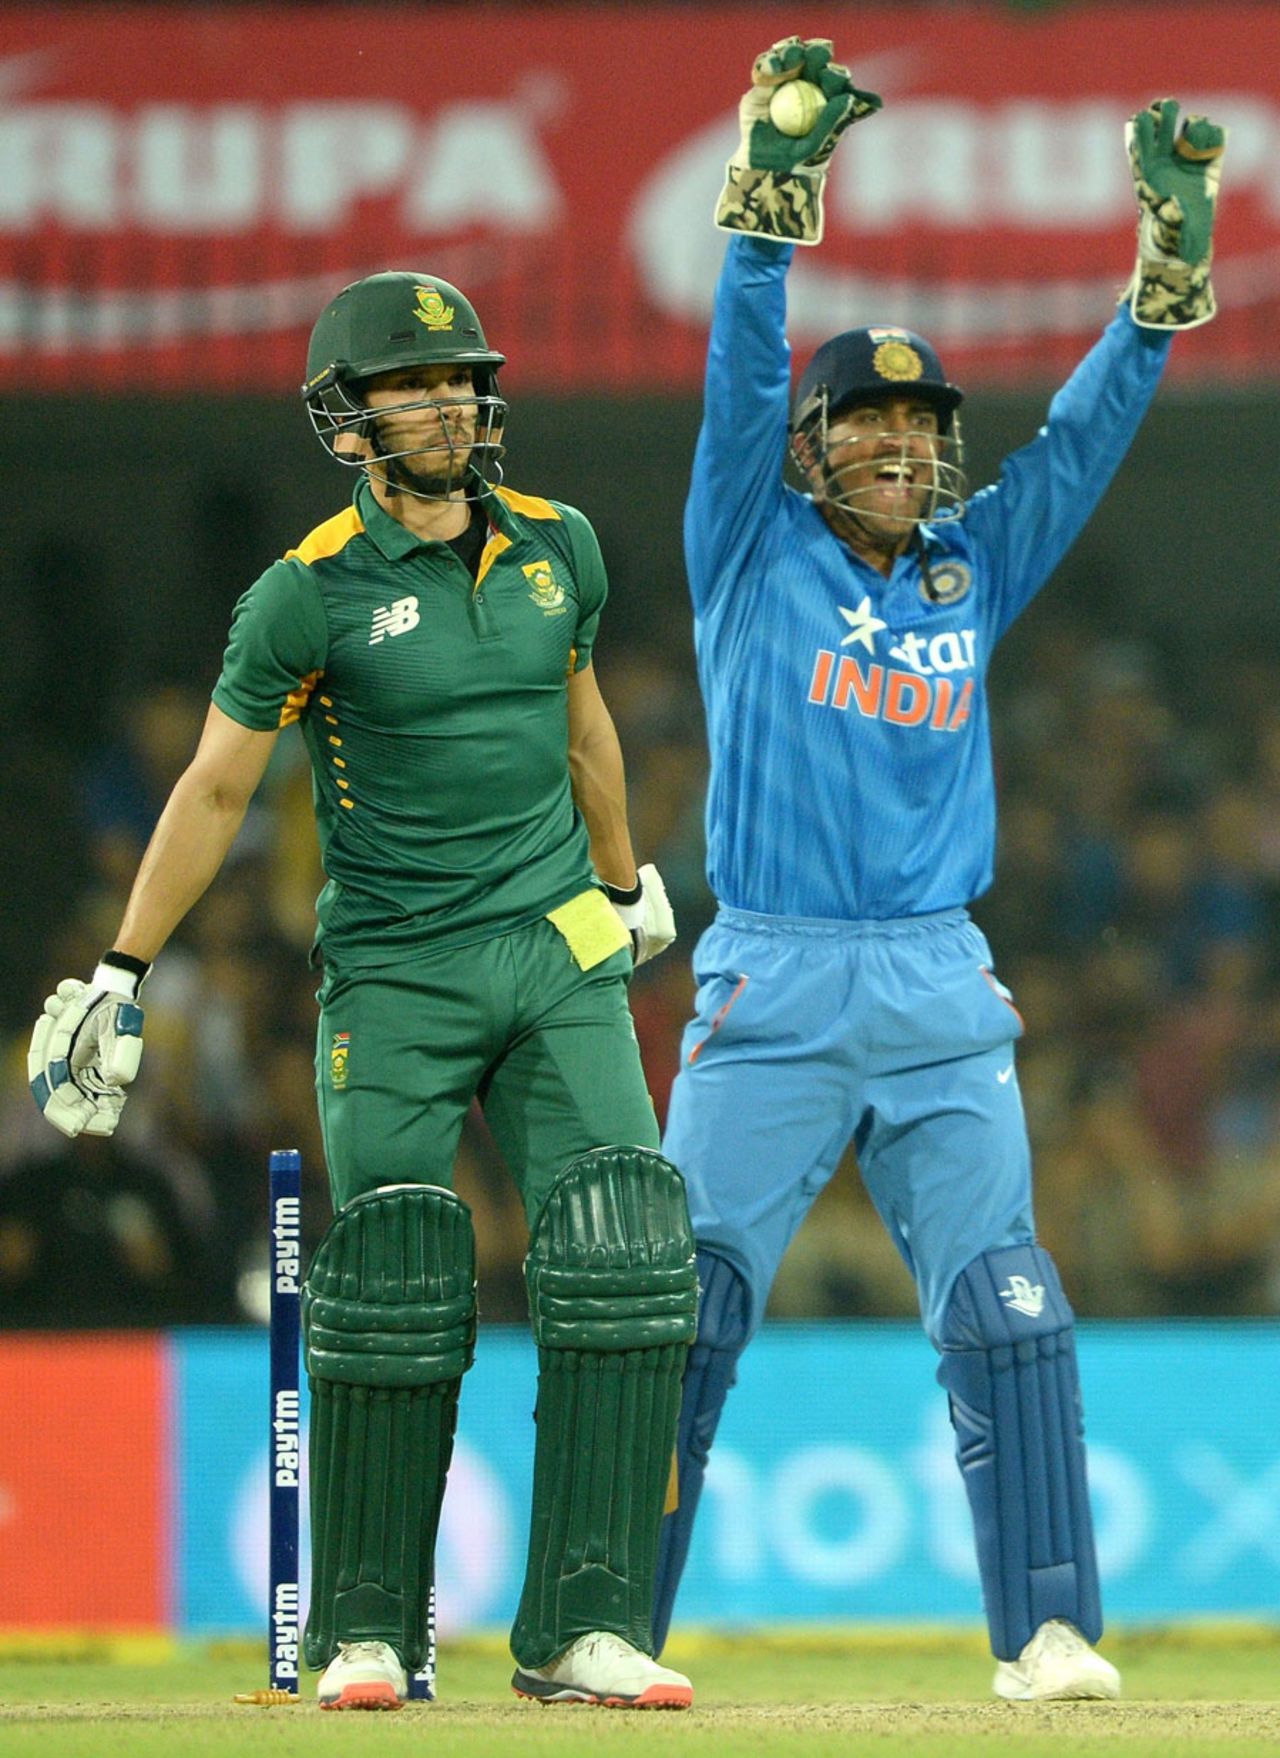 Farhaan Behardien watches on as he was given out caught behind, India v South Africa, 2nd ODI, Indore, October 14, 2015